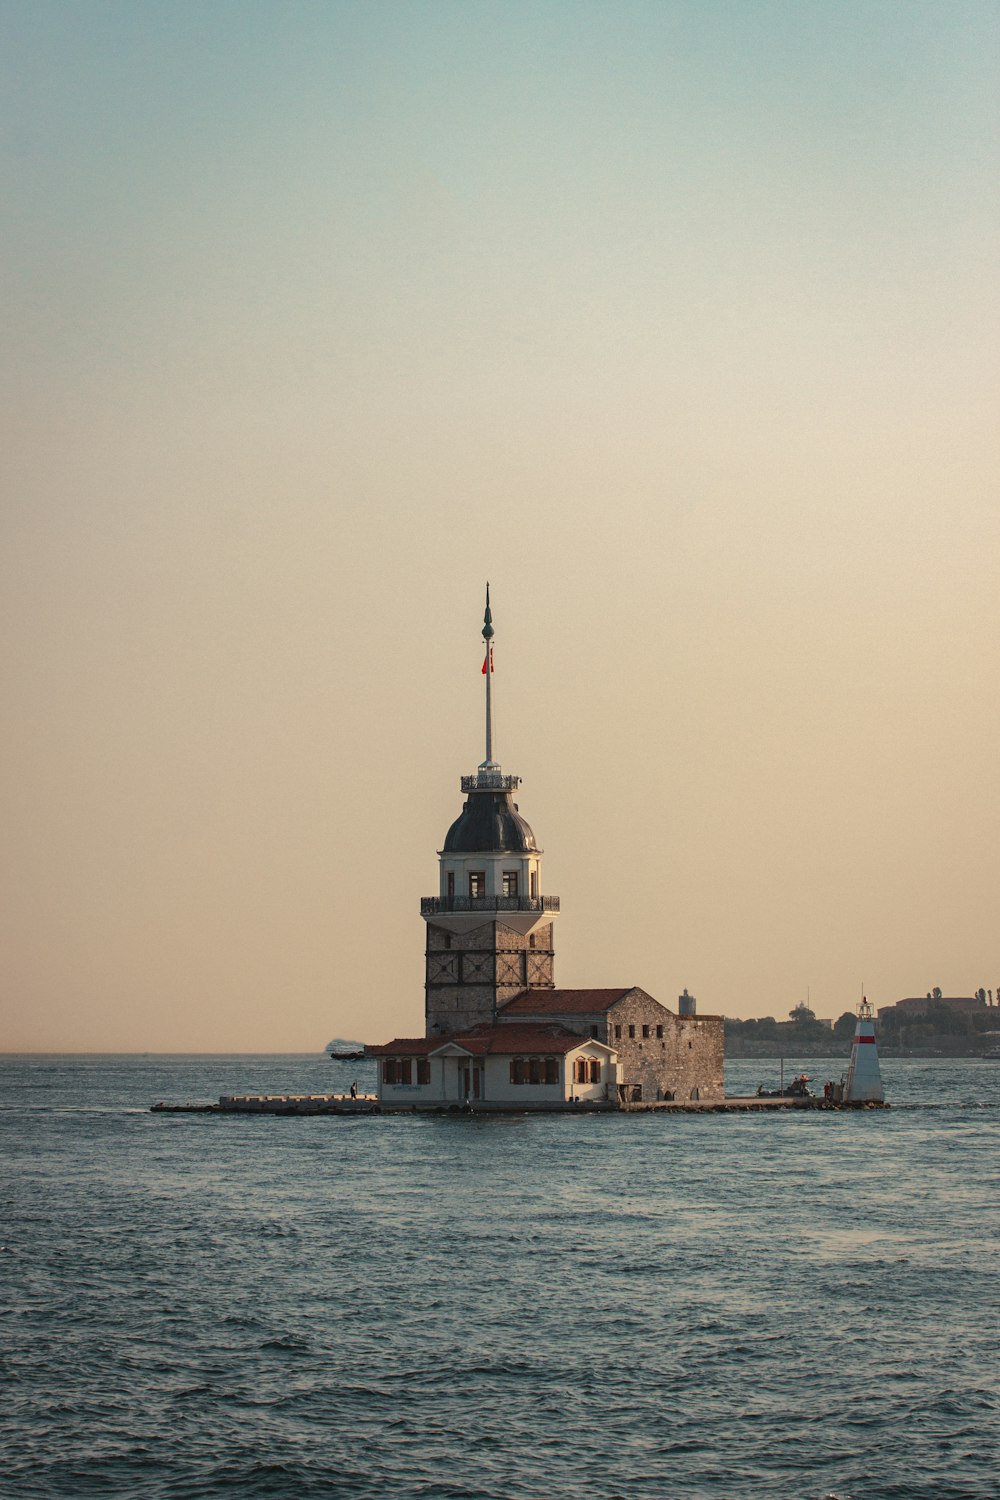 Maiden's Tower on an island